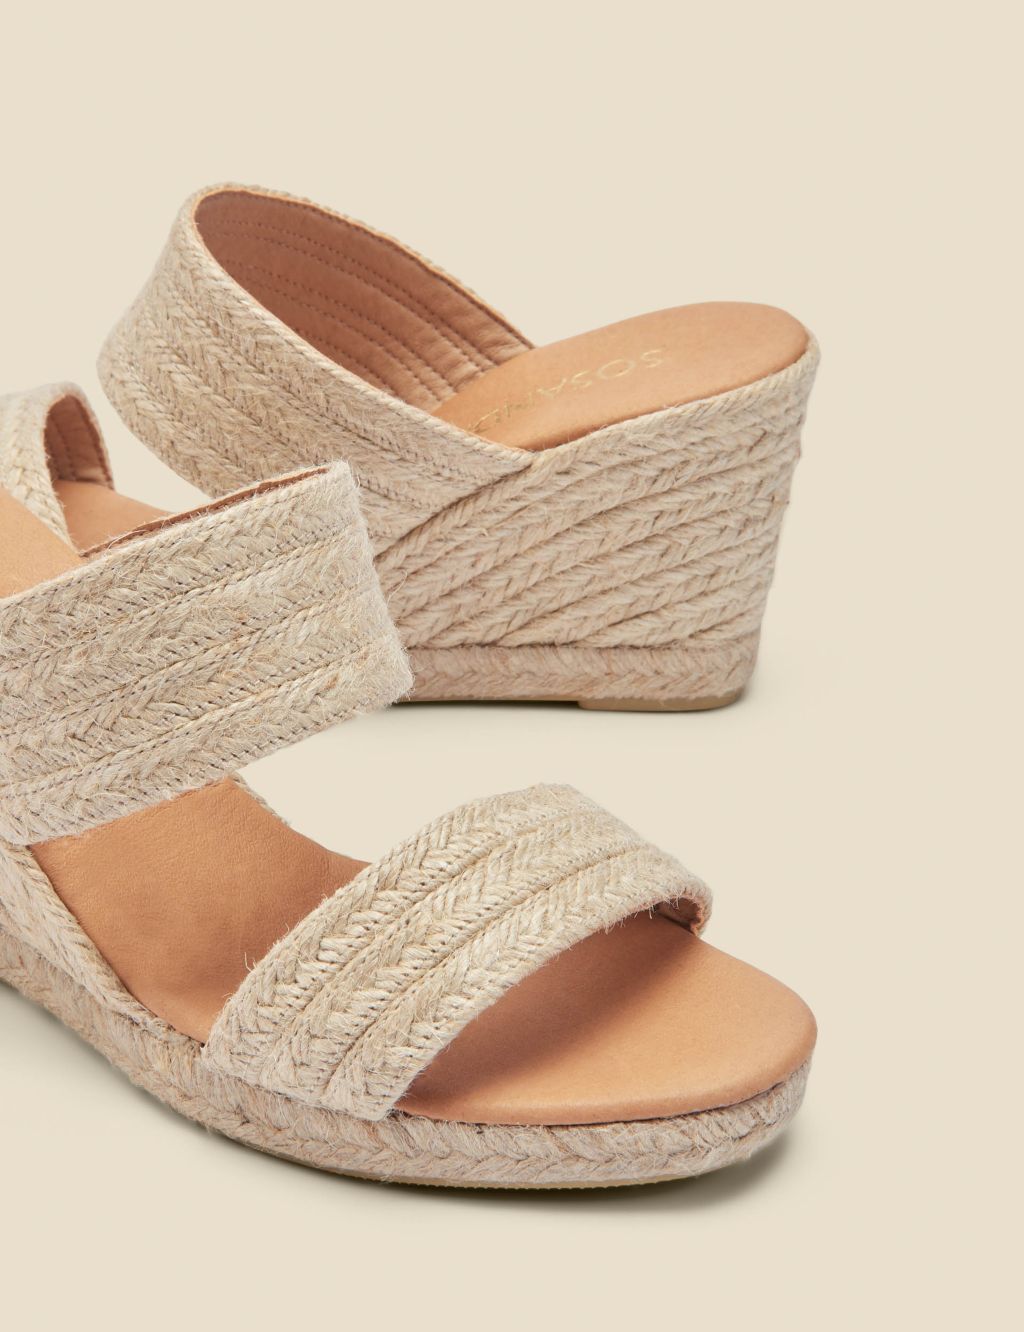 Woven Wedge Espadrille Mules image 3